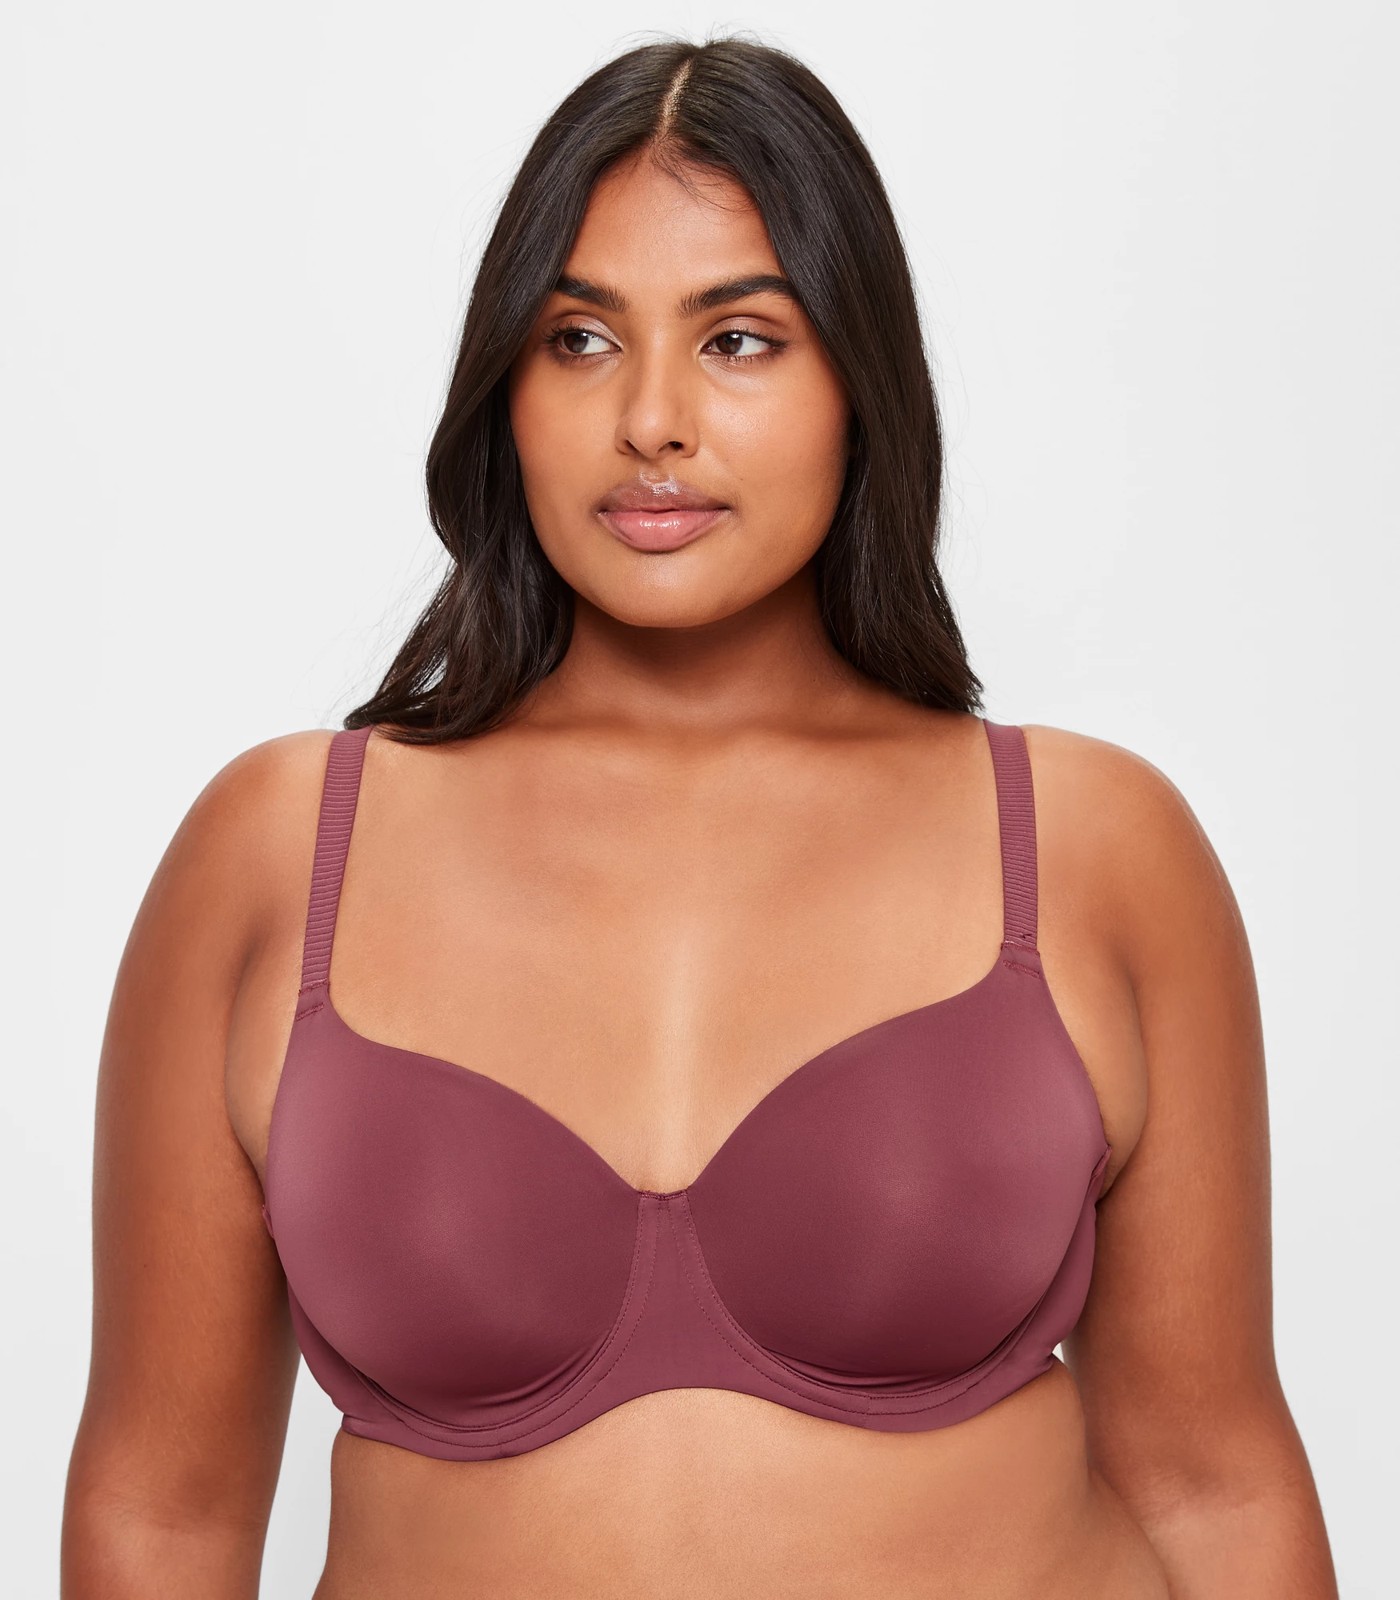 Bras from $10 and Underwear from $5 at Bras N Thing Online